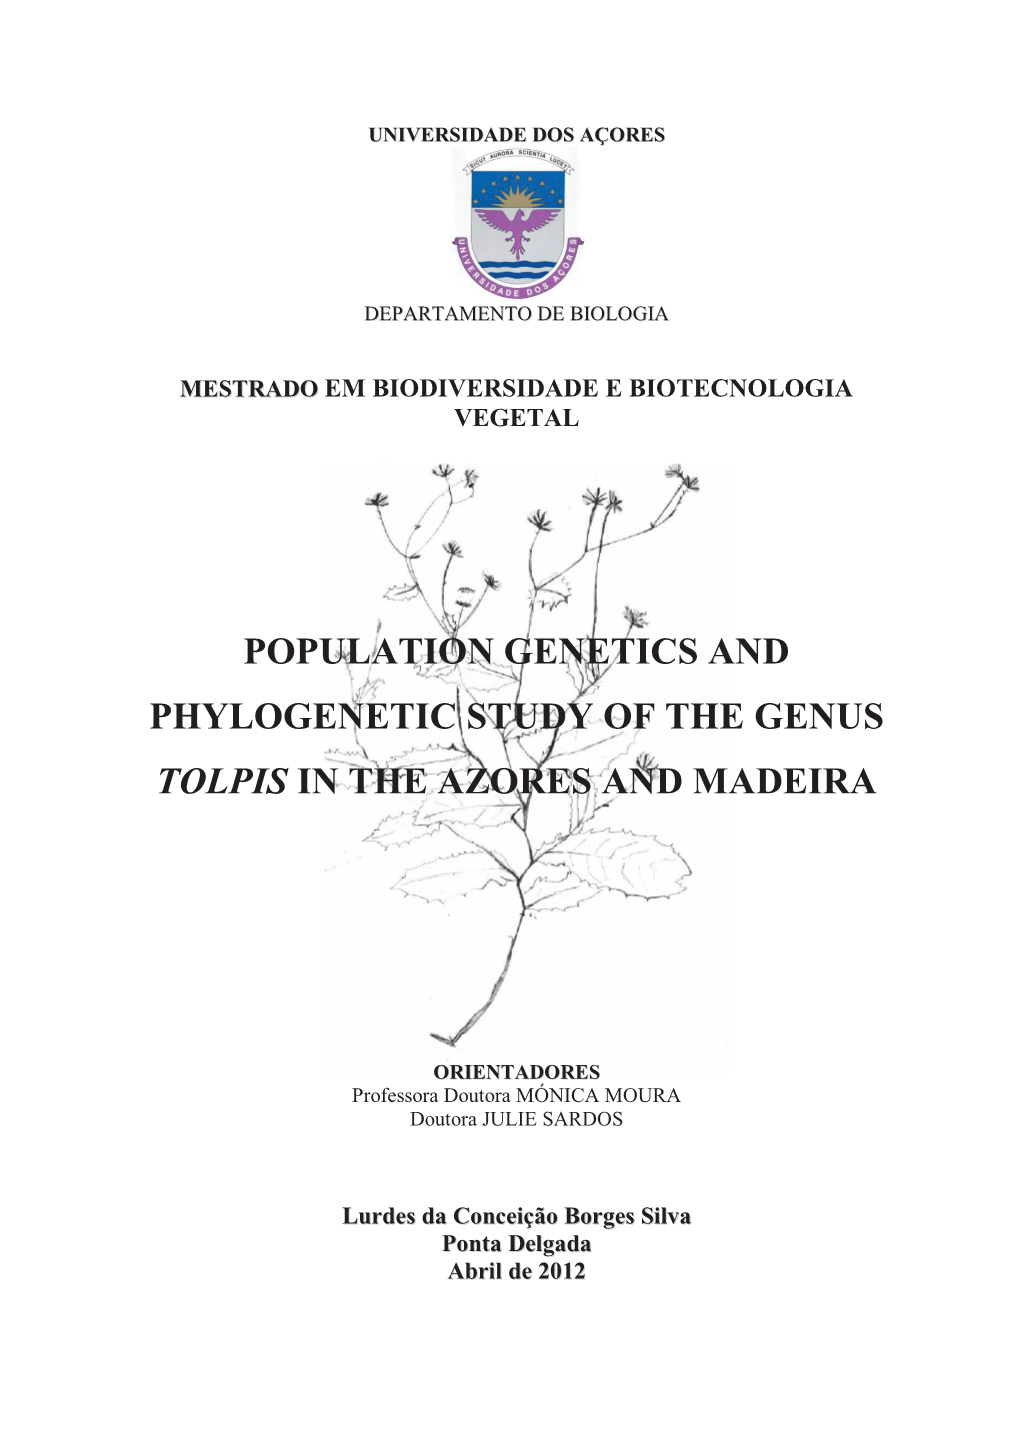 Population Genetics and Phylogenetic Study of the Genus Tolpis in the Azores and Madeira